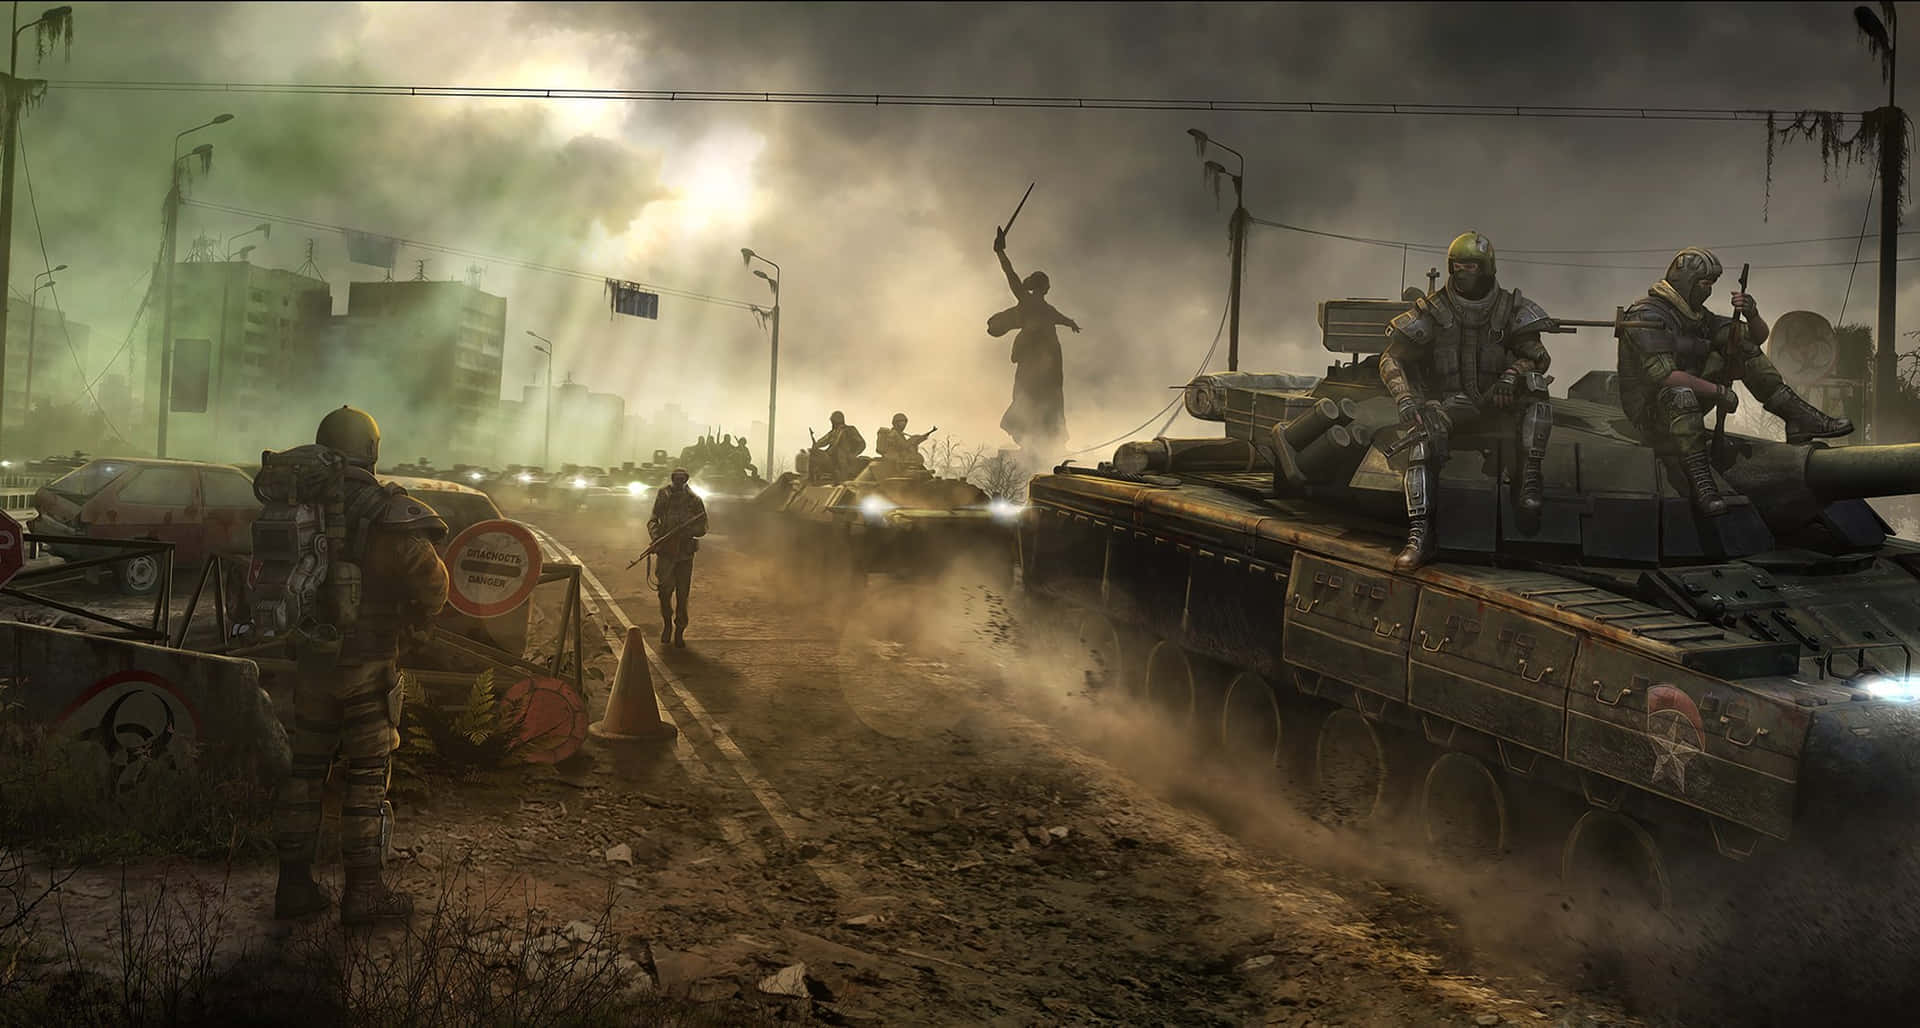 Fight for Victory in the Warzone Wallpaper